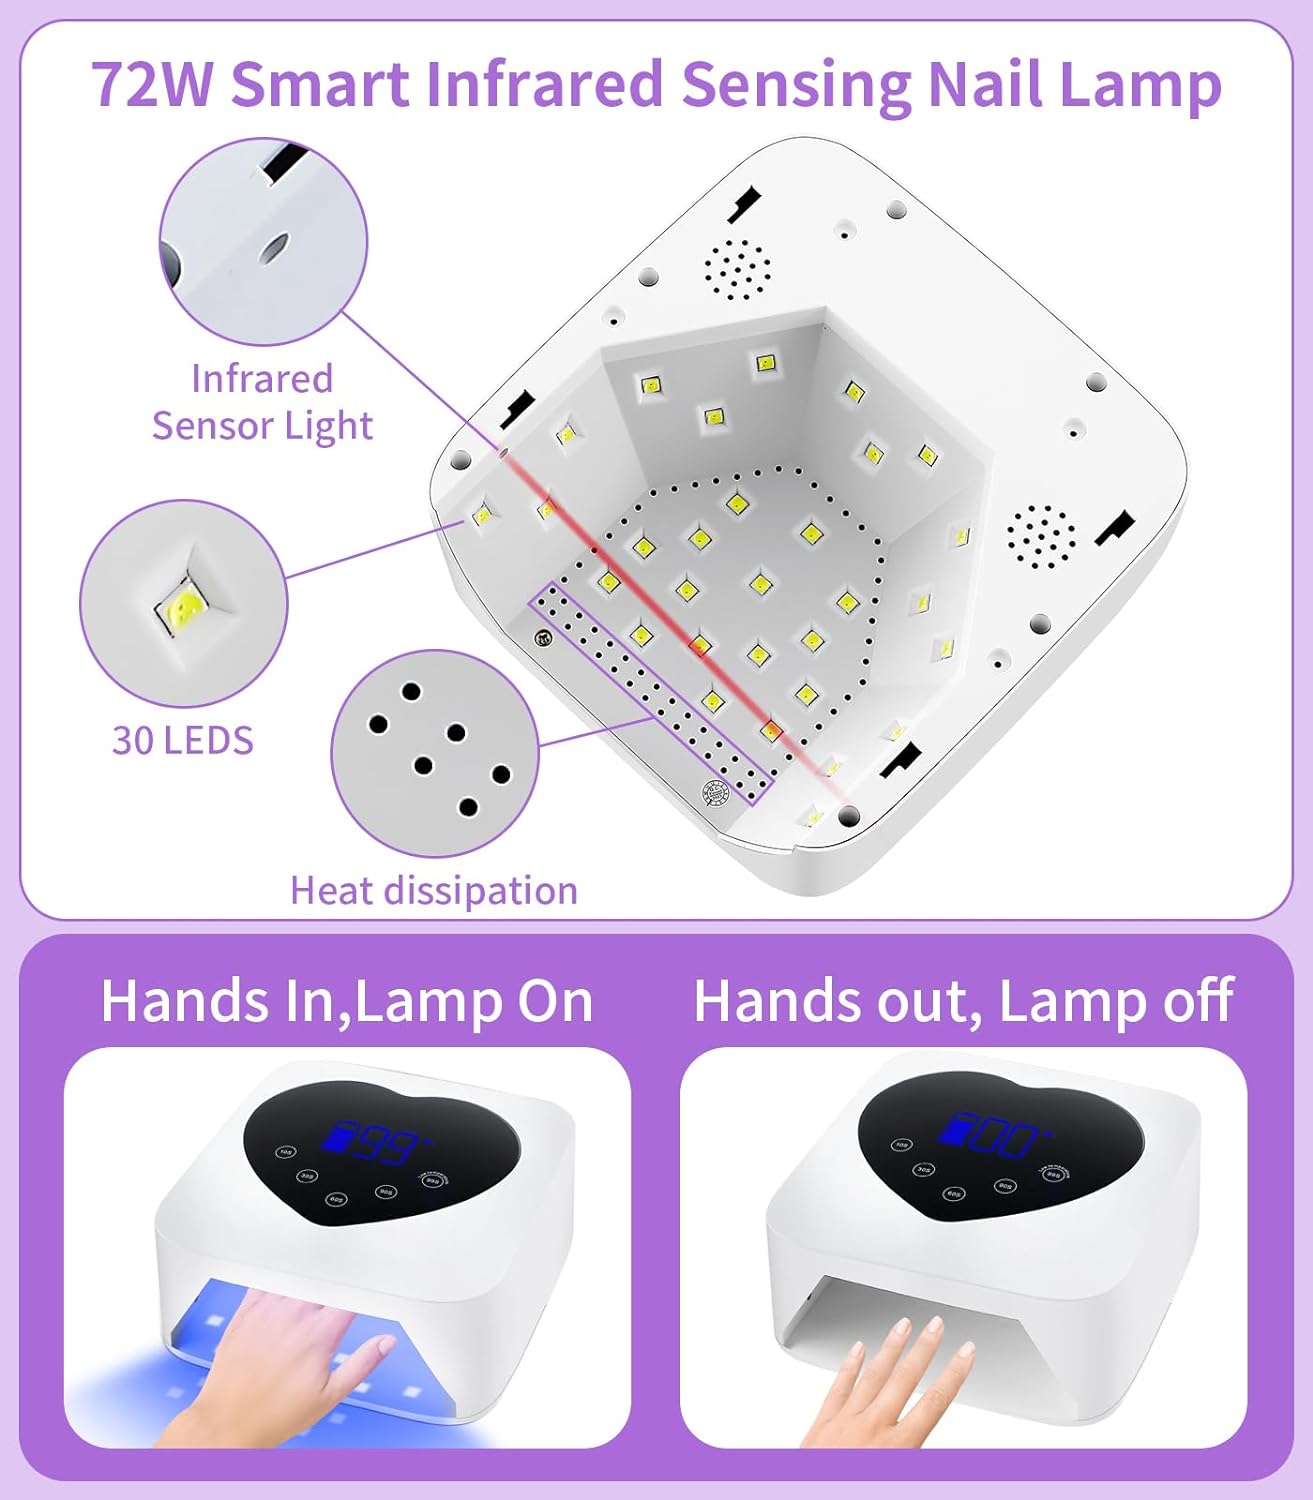 72W Cordless UV Nail Lamp for Gel Nails Diamond LED Nail Dryer Touch Control & Auto Sensor Fast Nail Light Curing Lamp